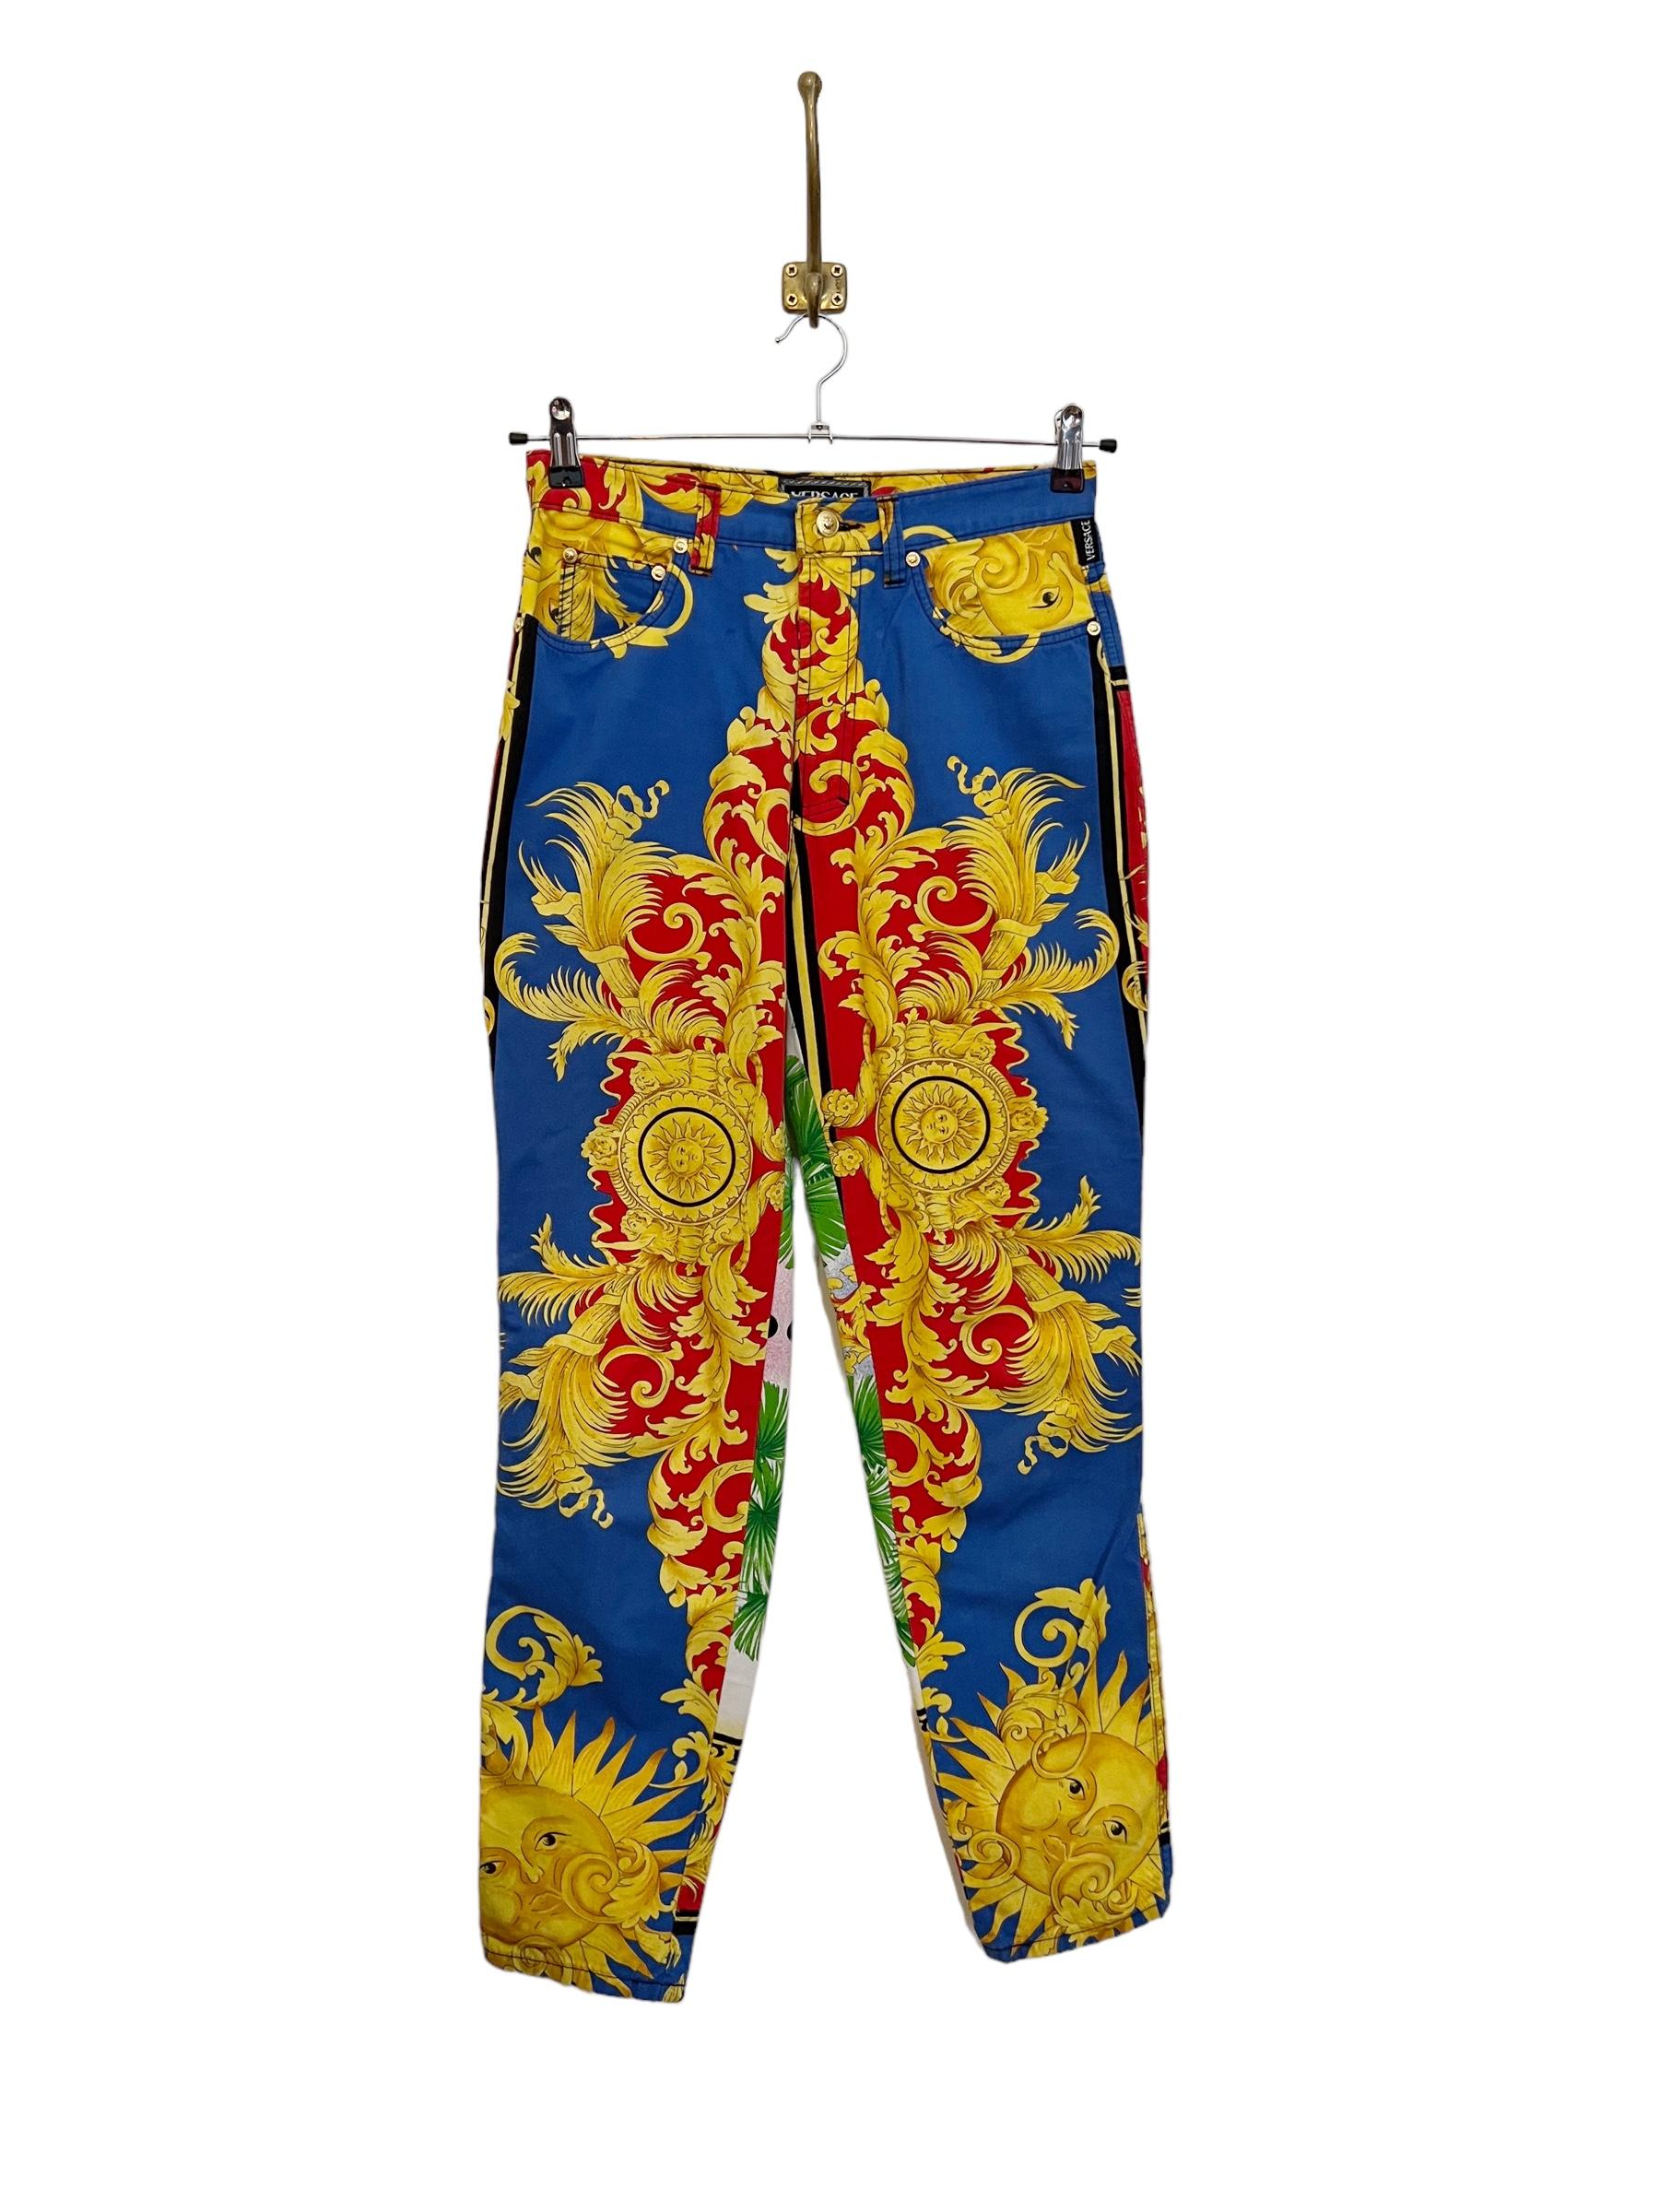 Women's 1990's Baroque Gianni Versace High waisted Colourful Rococo patterned Jeans For Sale